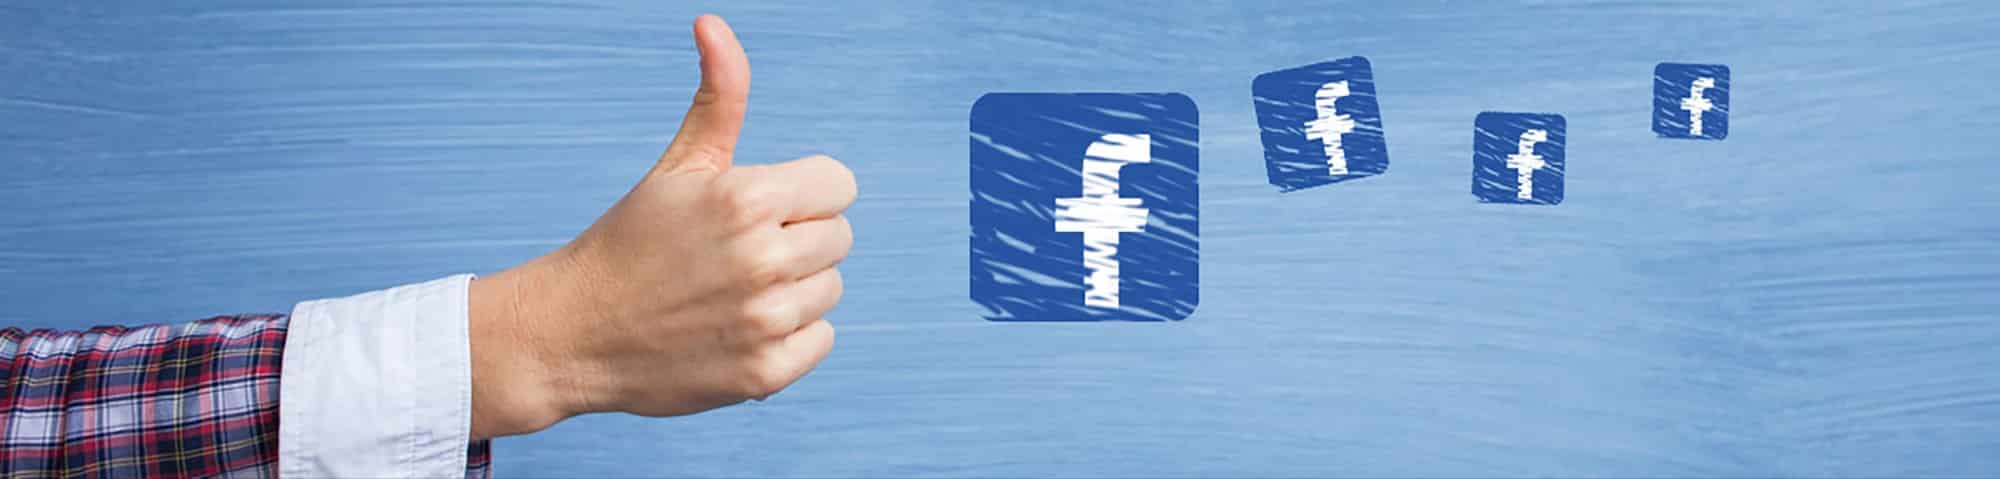 How to Use Facebook to Bolster Your Business